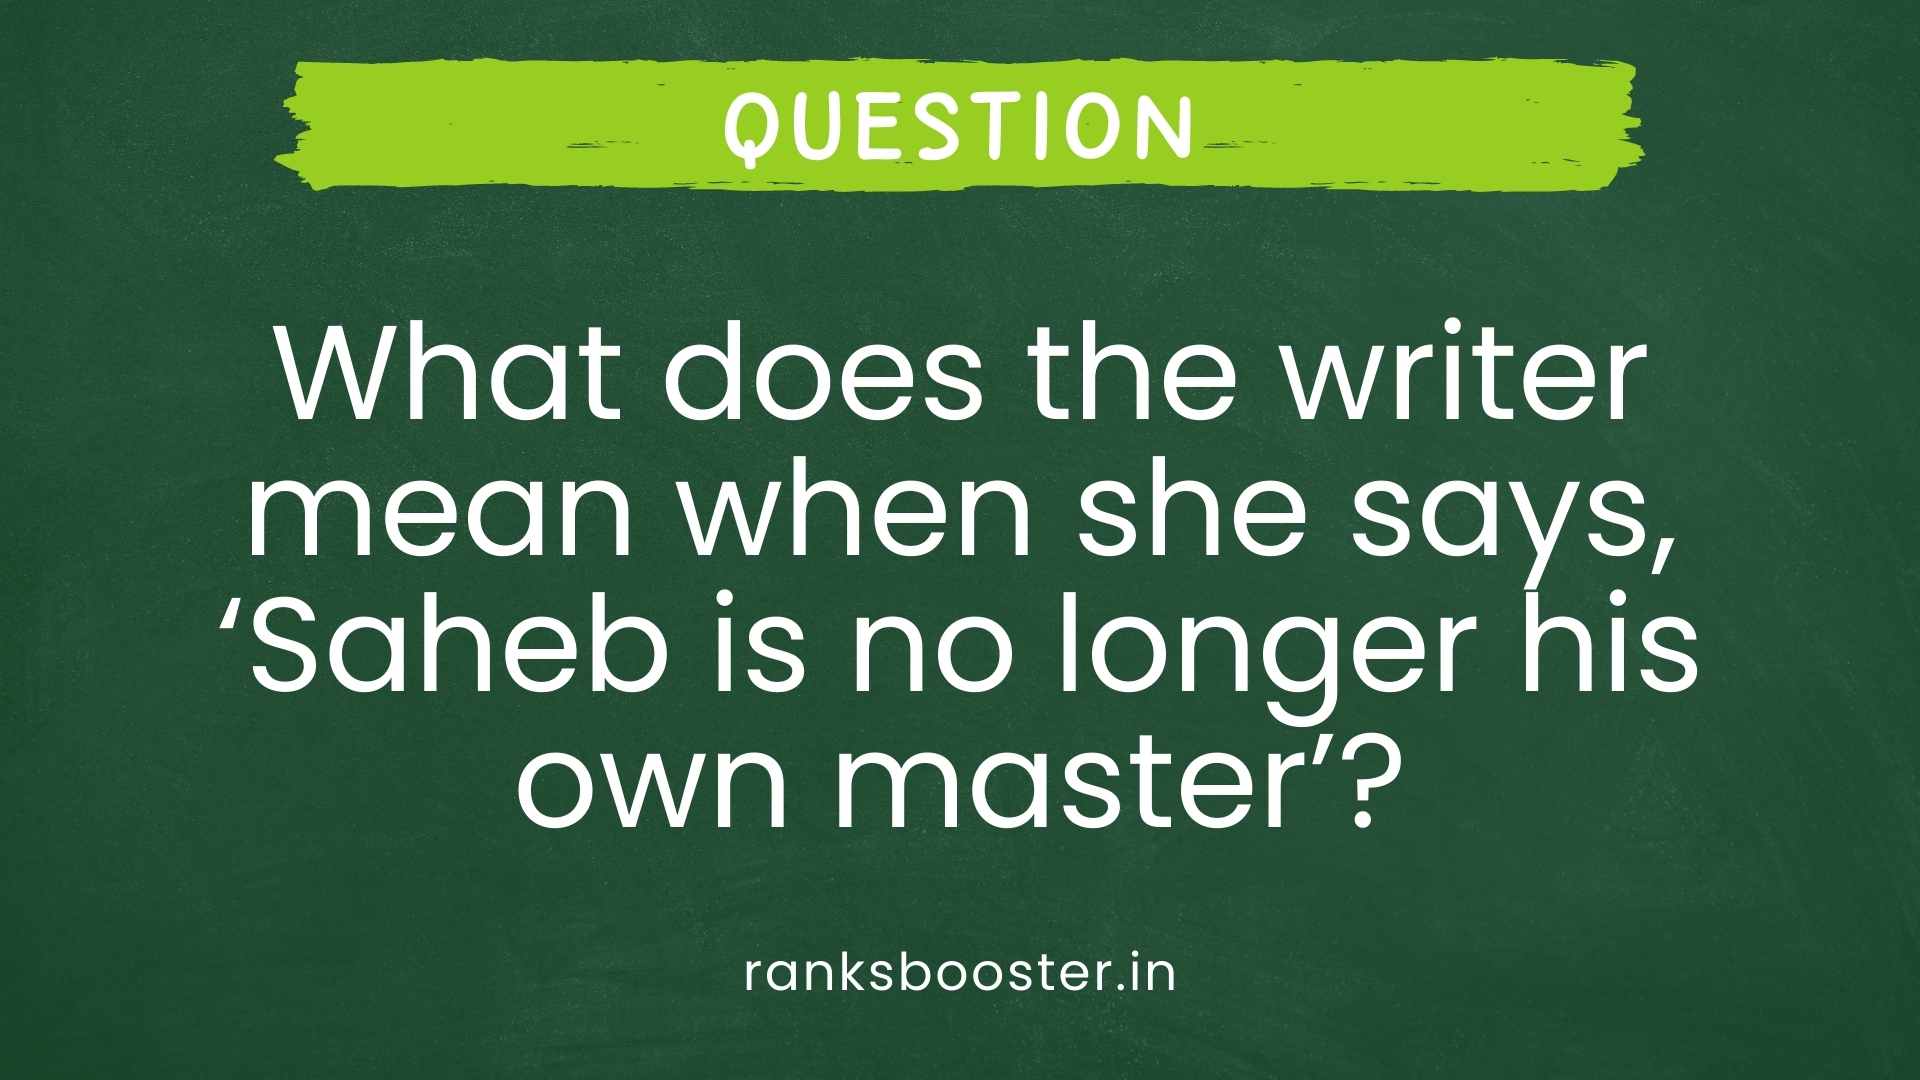 Question: What does the writer mean when she says, ‘Saheb is no longer his own master’? [CBSE Delhi 2009]